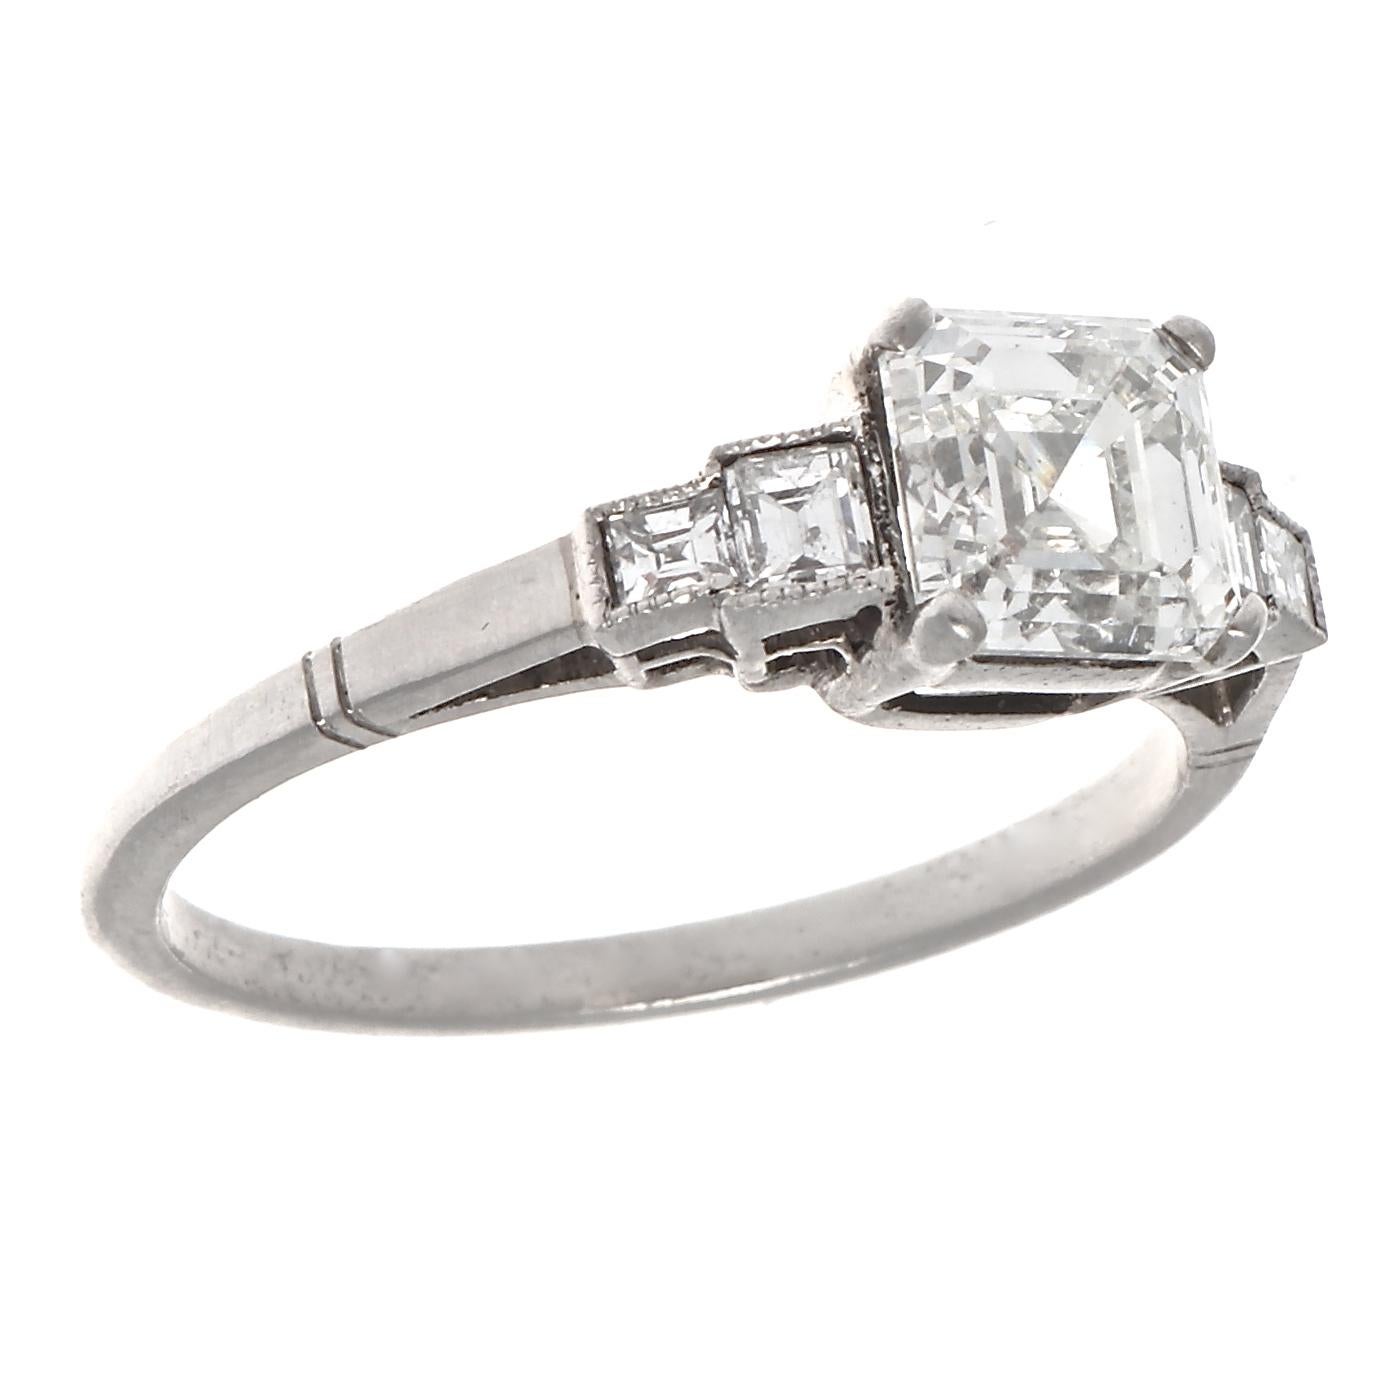 A direct reflection of the dramatic fashion and distinct style of the art deco time period. It was in 1909 that the asscher cut became more than a fantasy and became reality. Featuring a 1.30 carat asscher cut diamond that is GIA certified as H